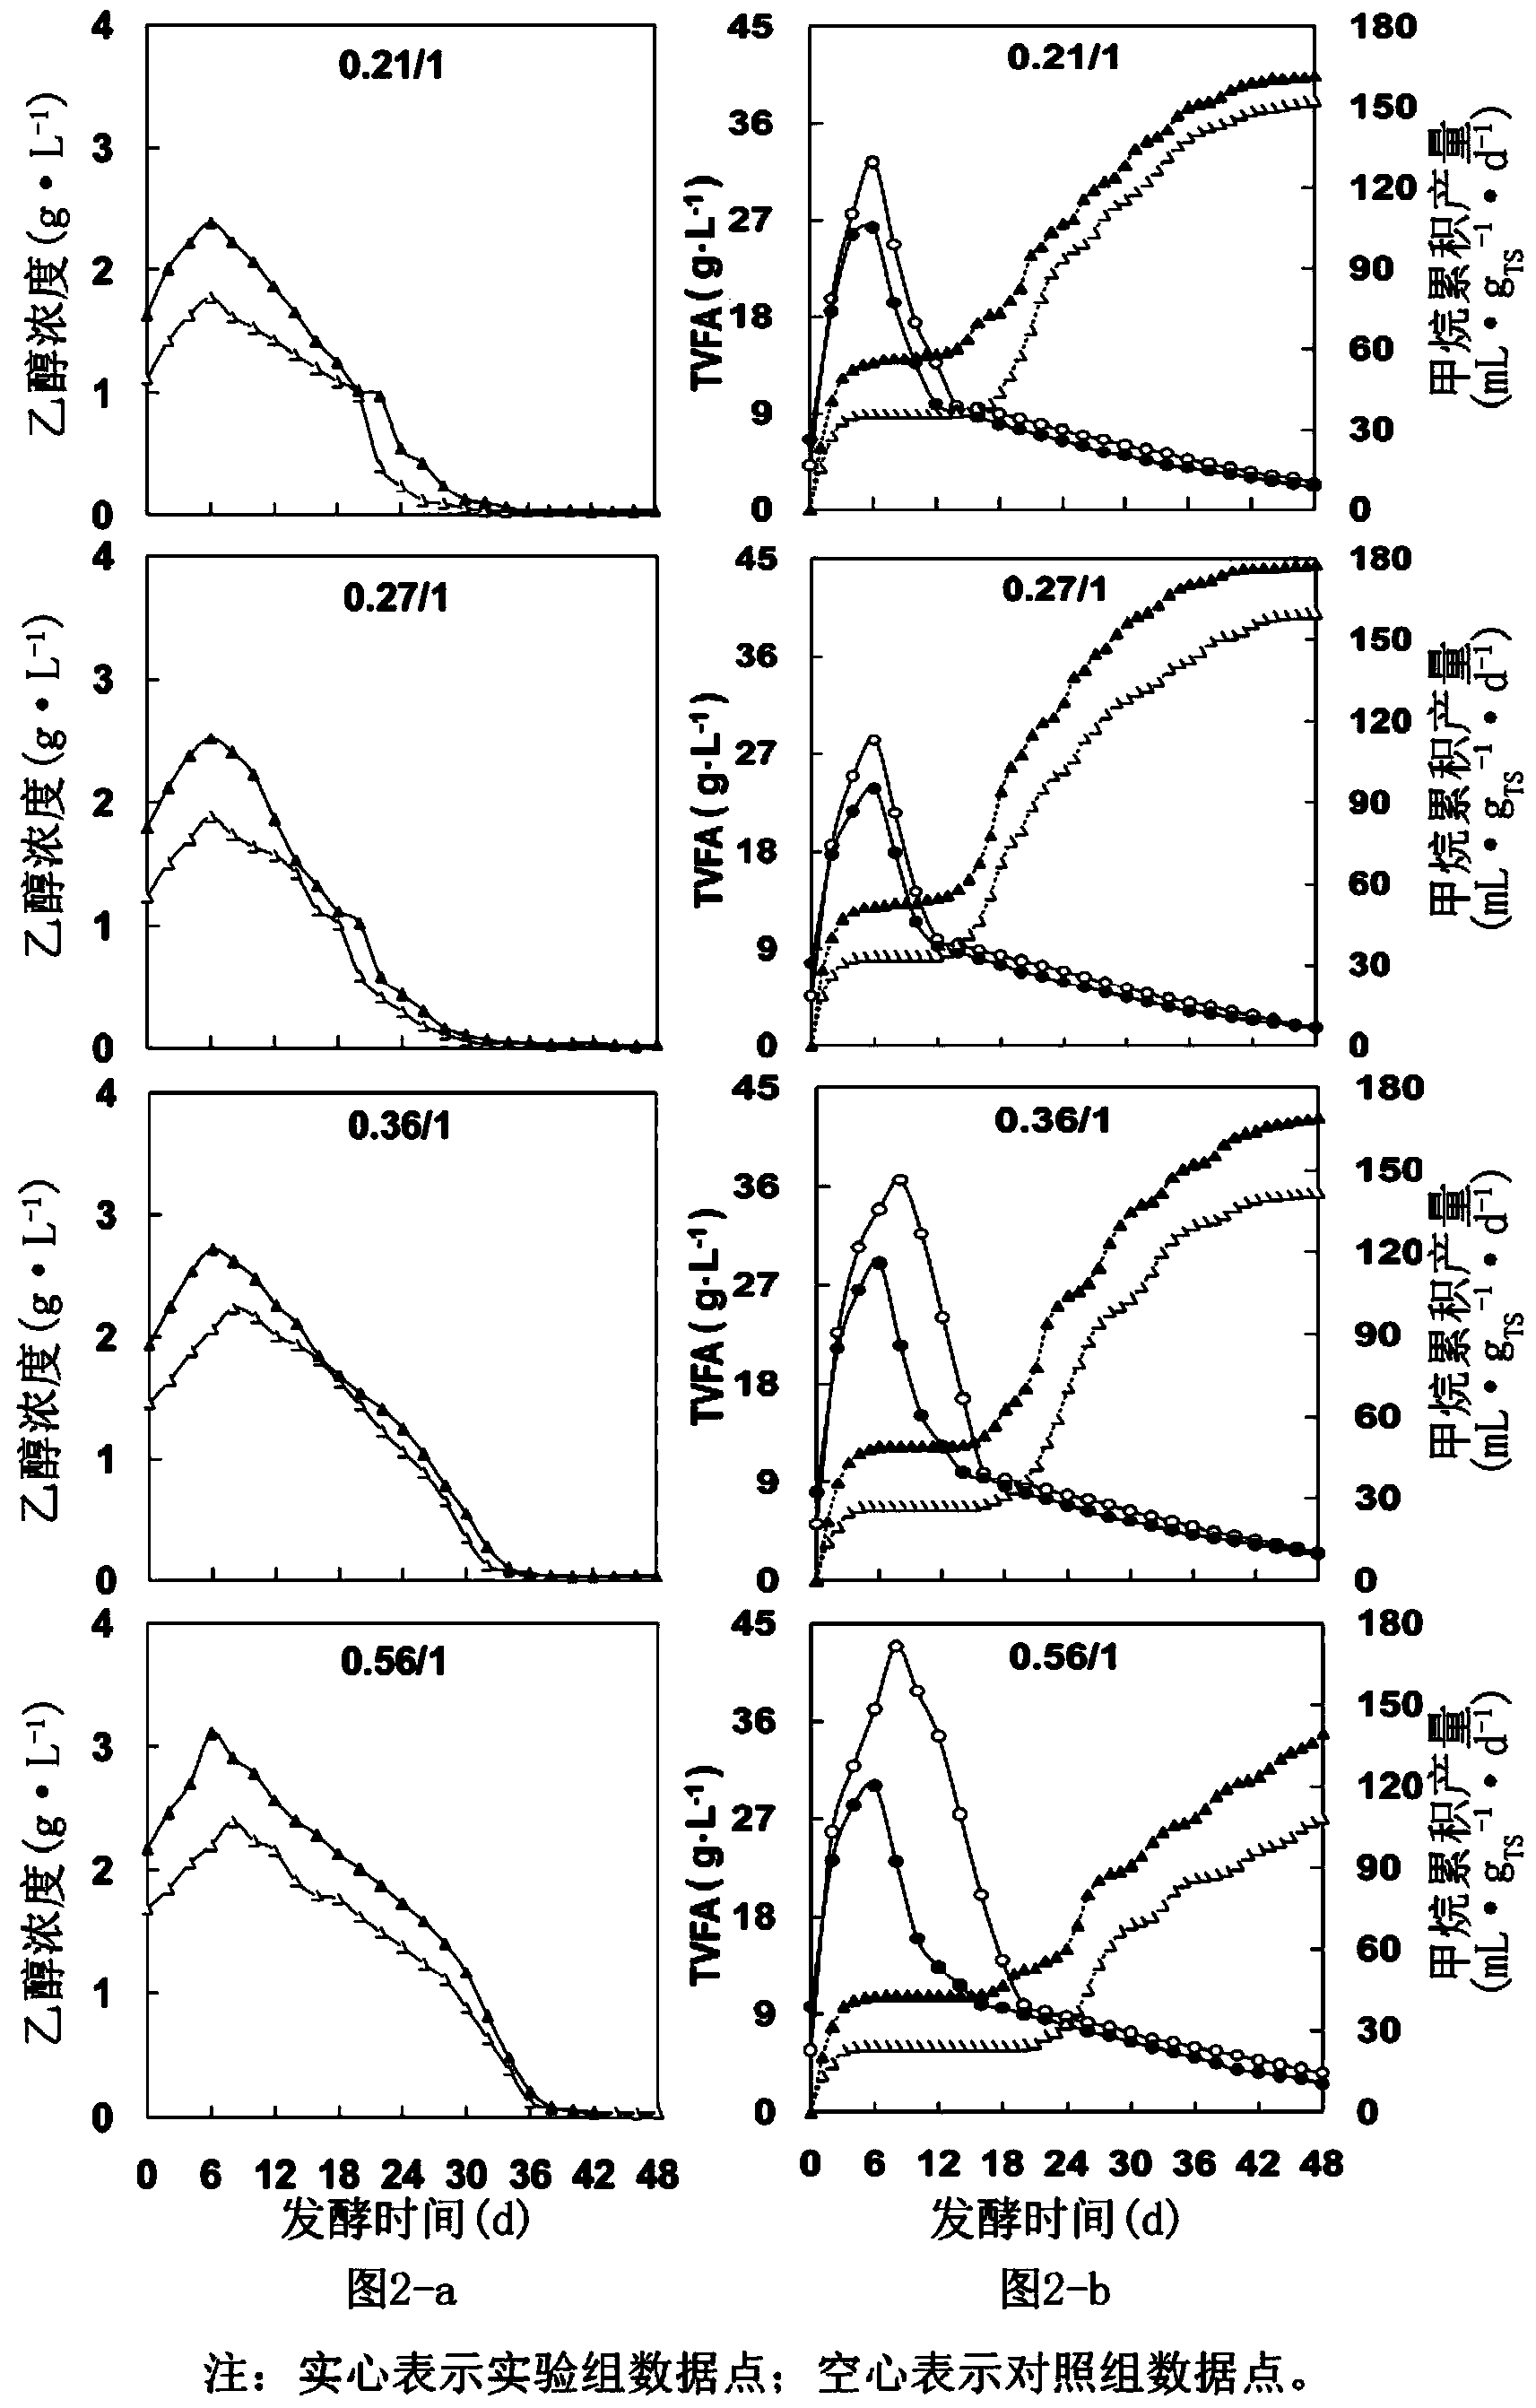 Method for producing marsh gas by two-phase dry-type mixed anaerobic fermentation